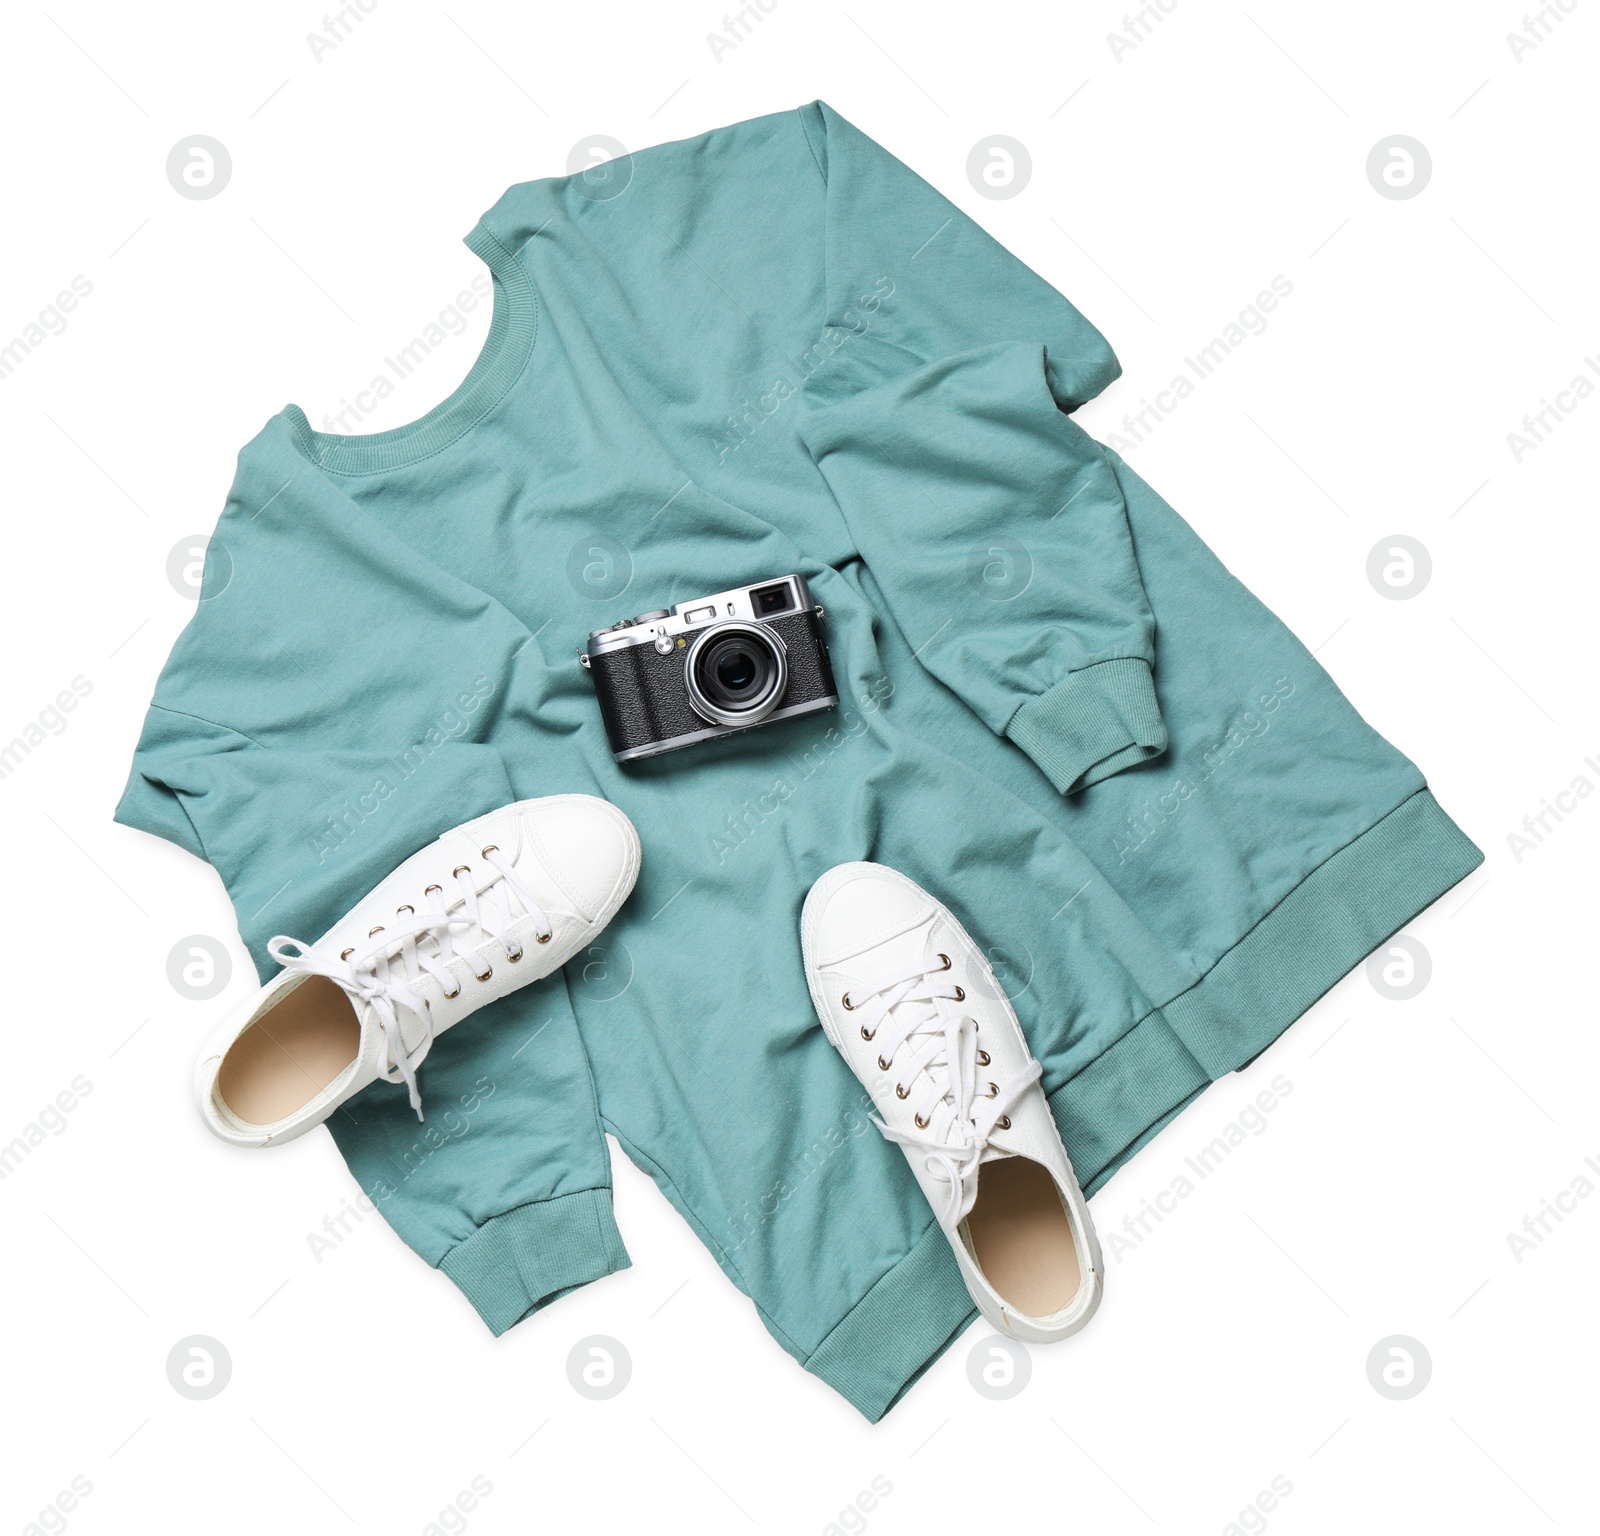 Photo of Sweater, shoes and camera on light background, flat lay